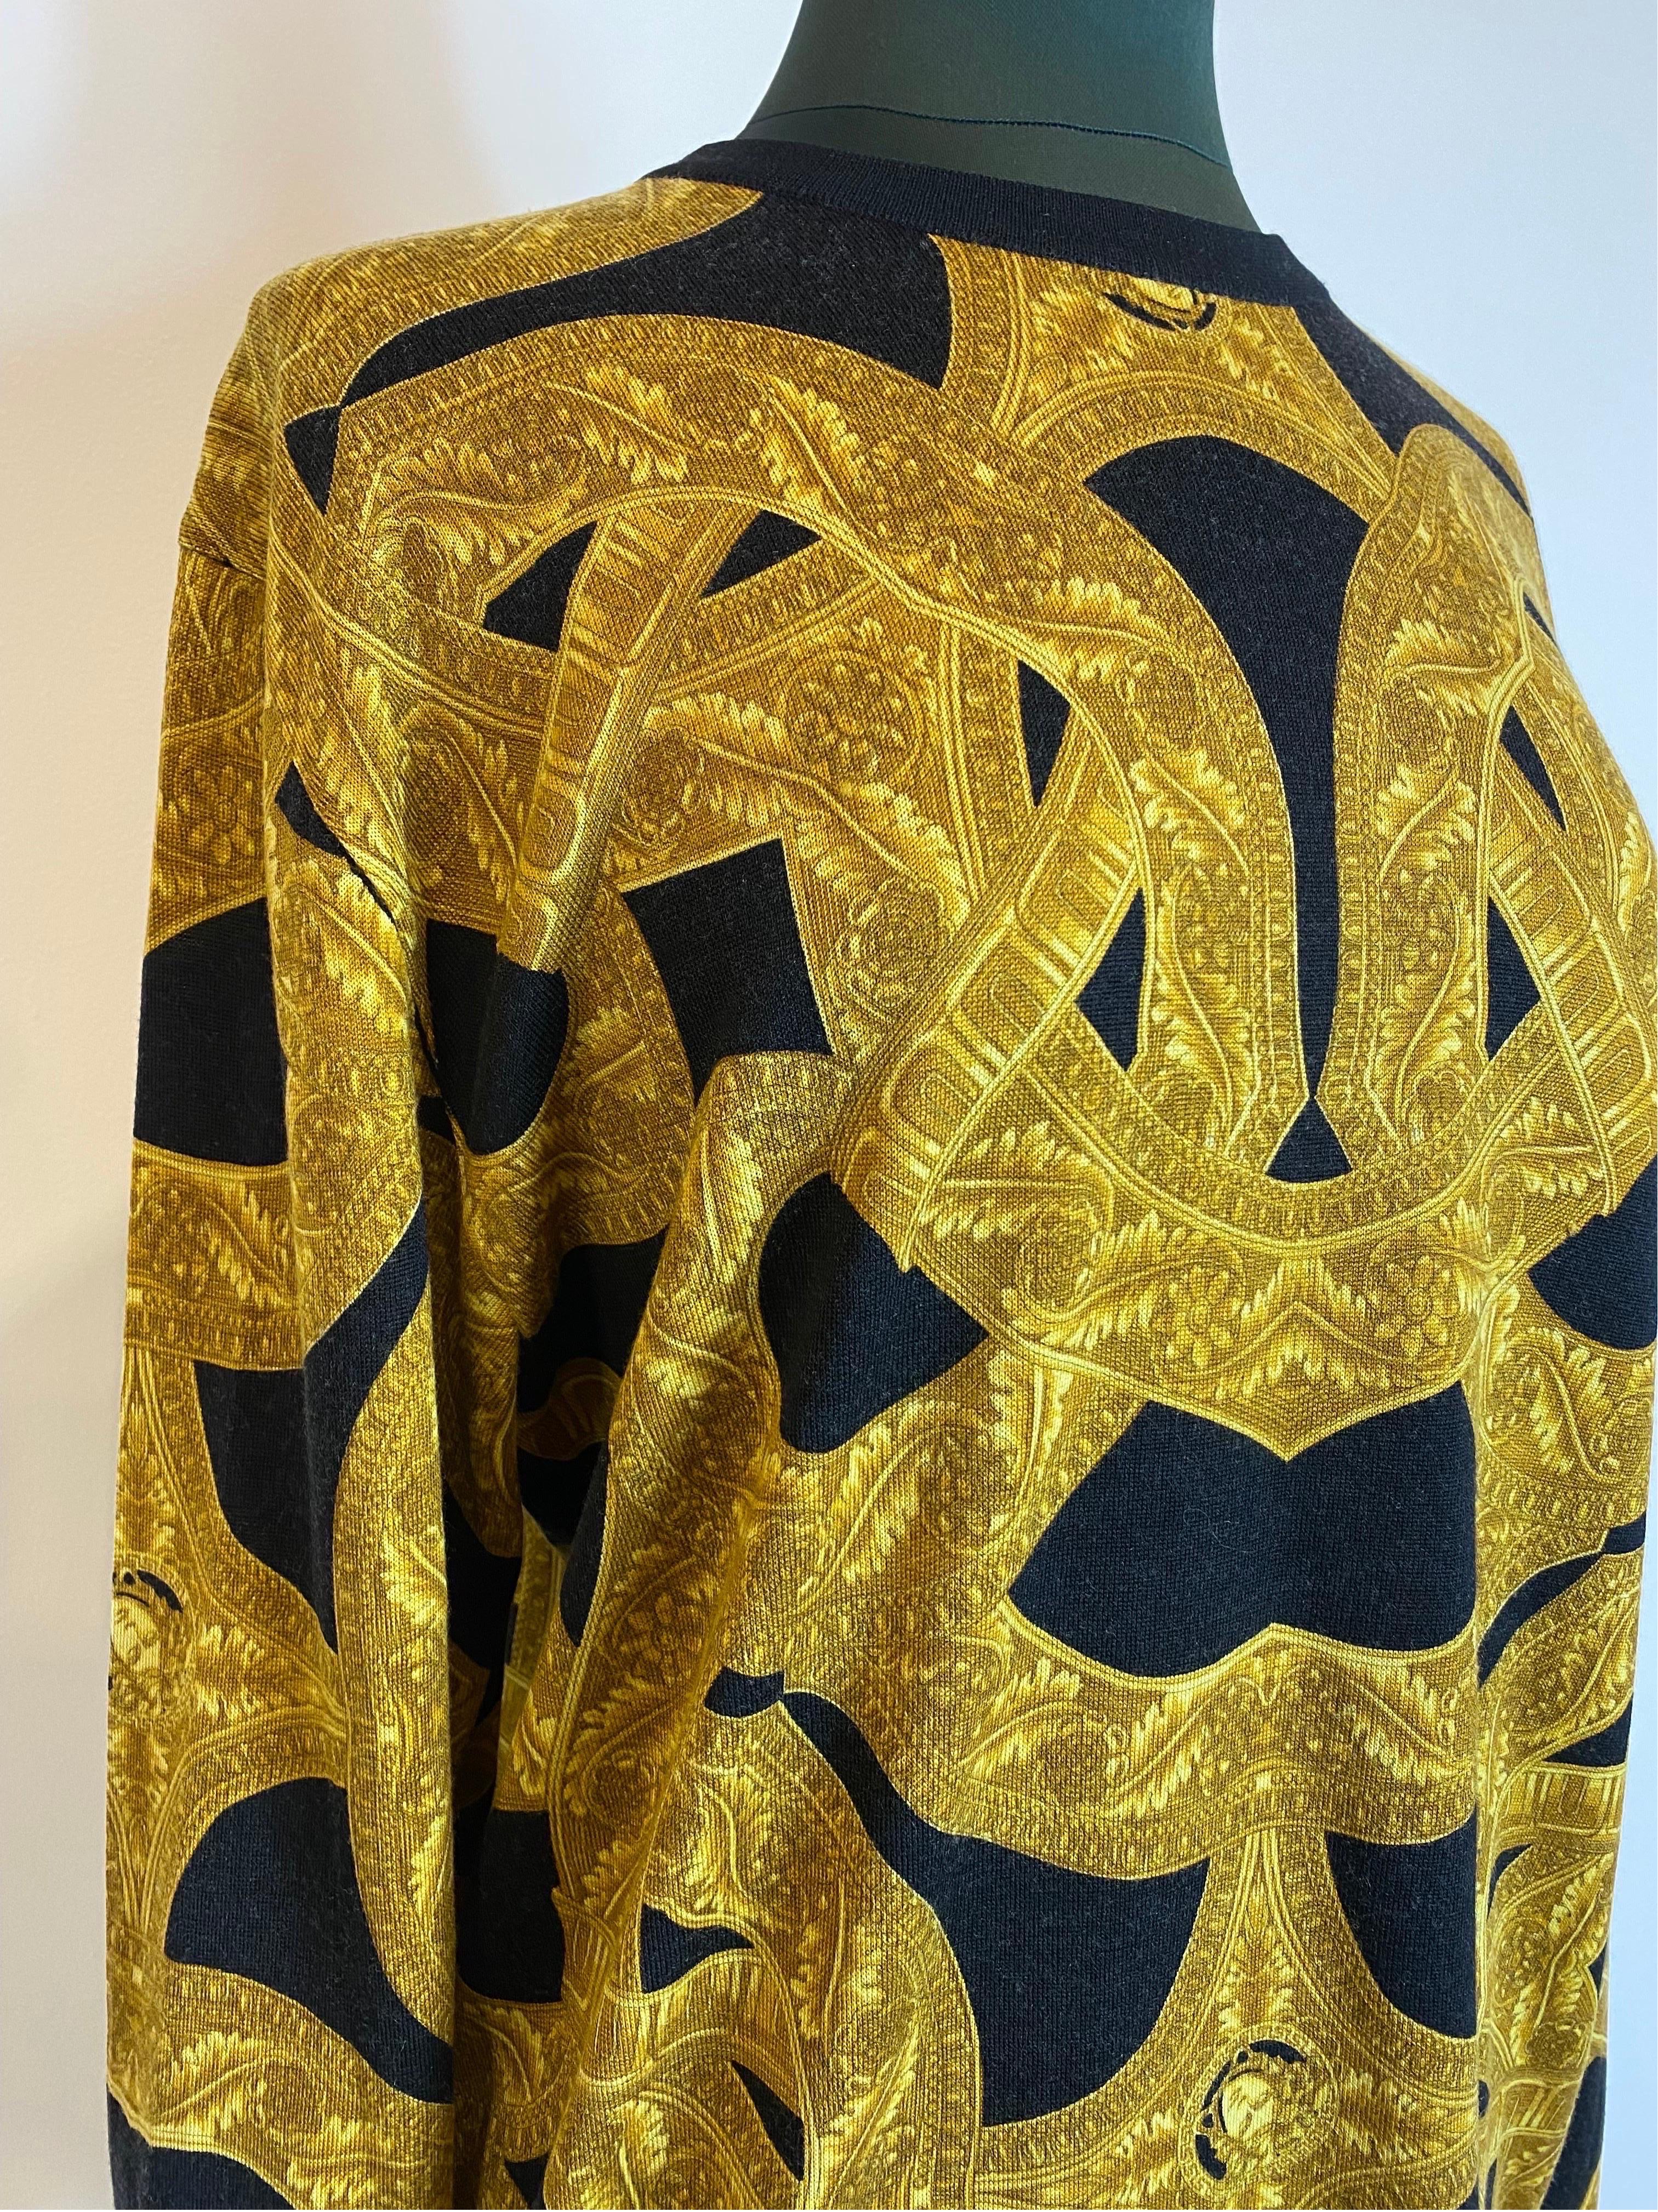 In wool and silk. Classic Versace pattern in gold color.
Size 54
Shoulder 51
Length 72
Sleeve length 71
Bust 55
In good condition, shows signs of normal use.